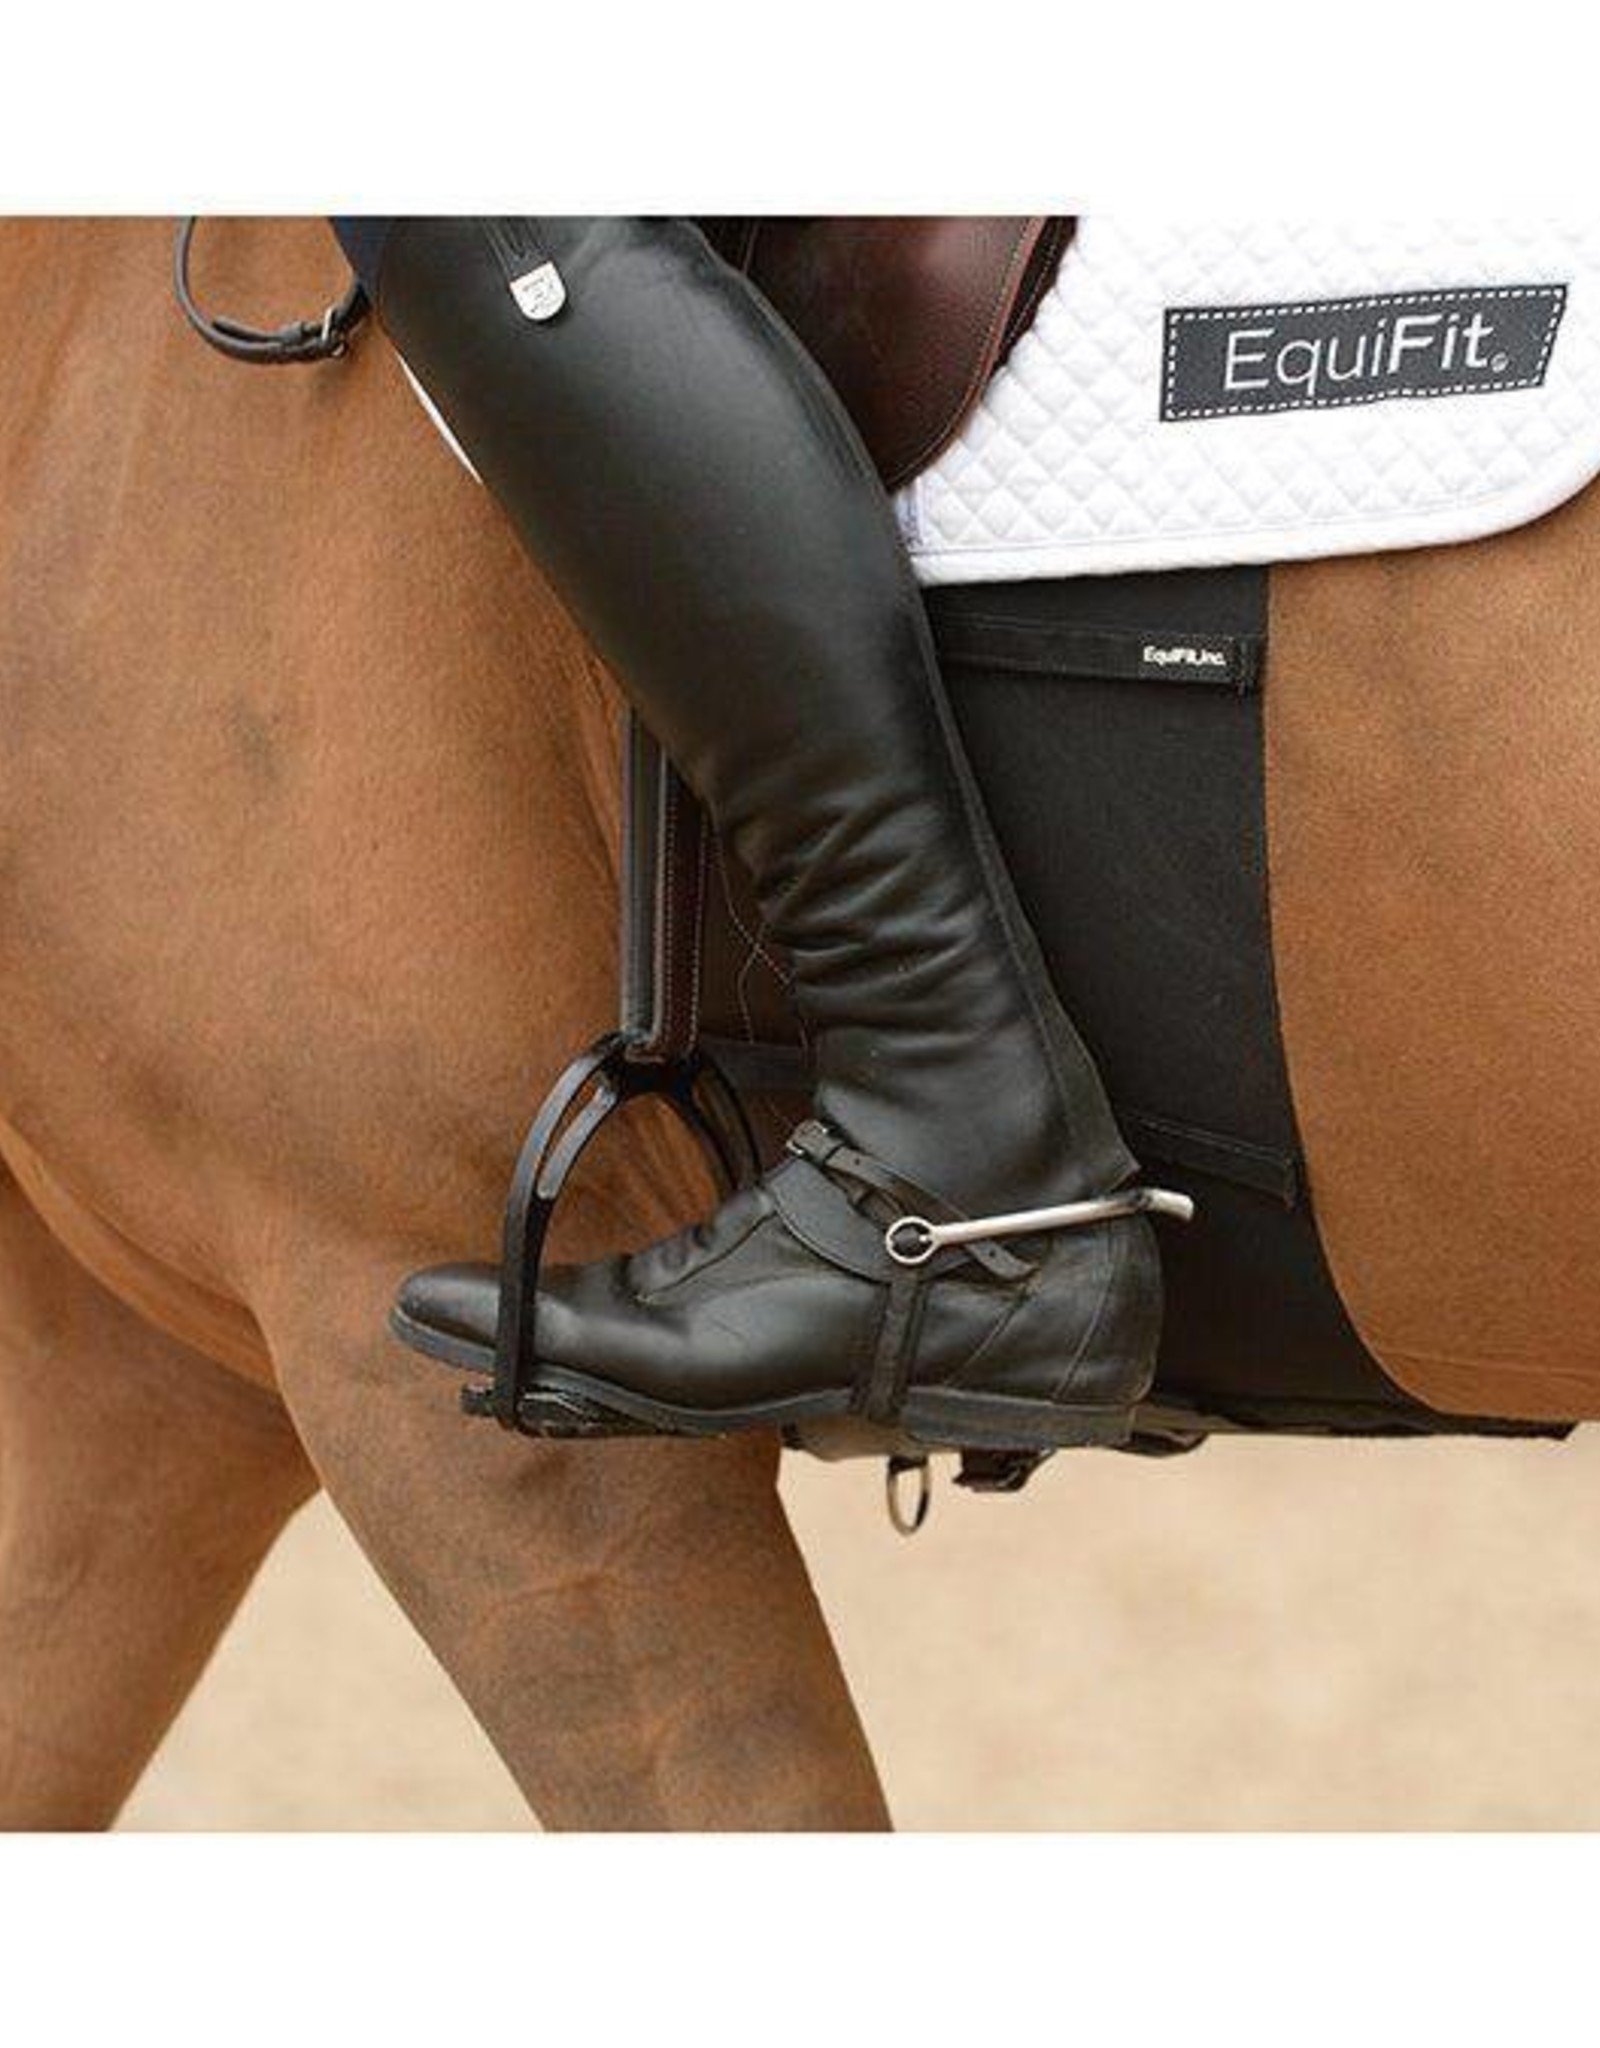 EquiFit Protective BellyBand